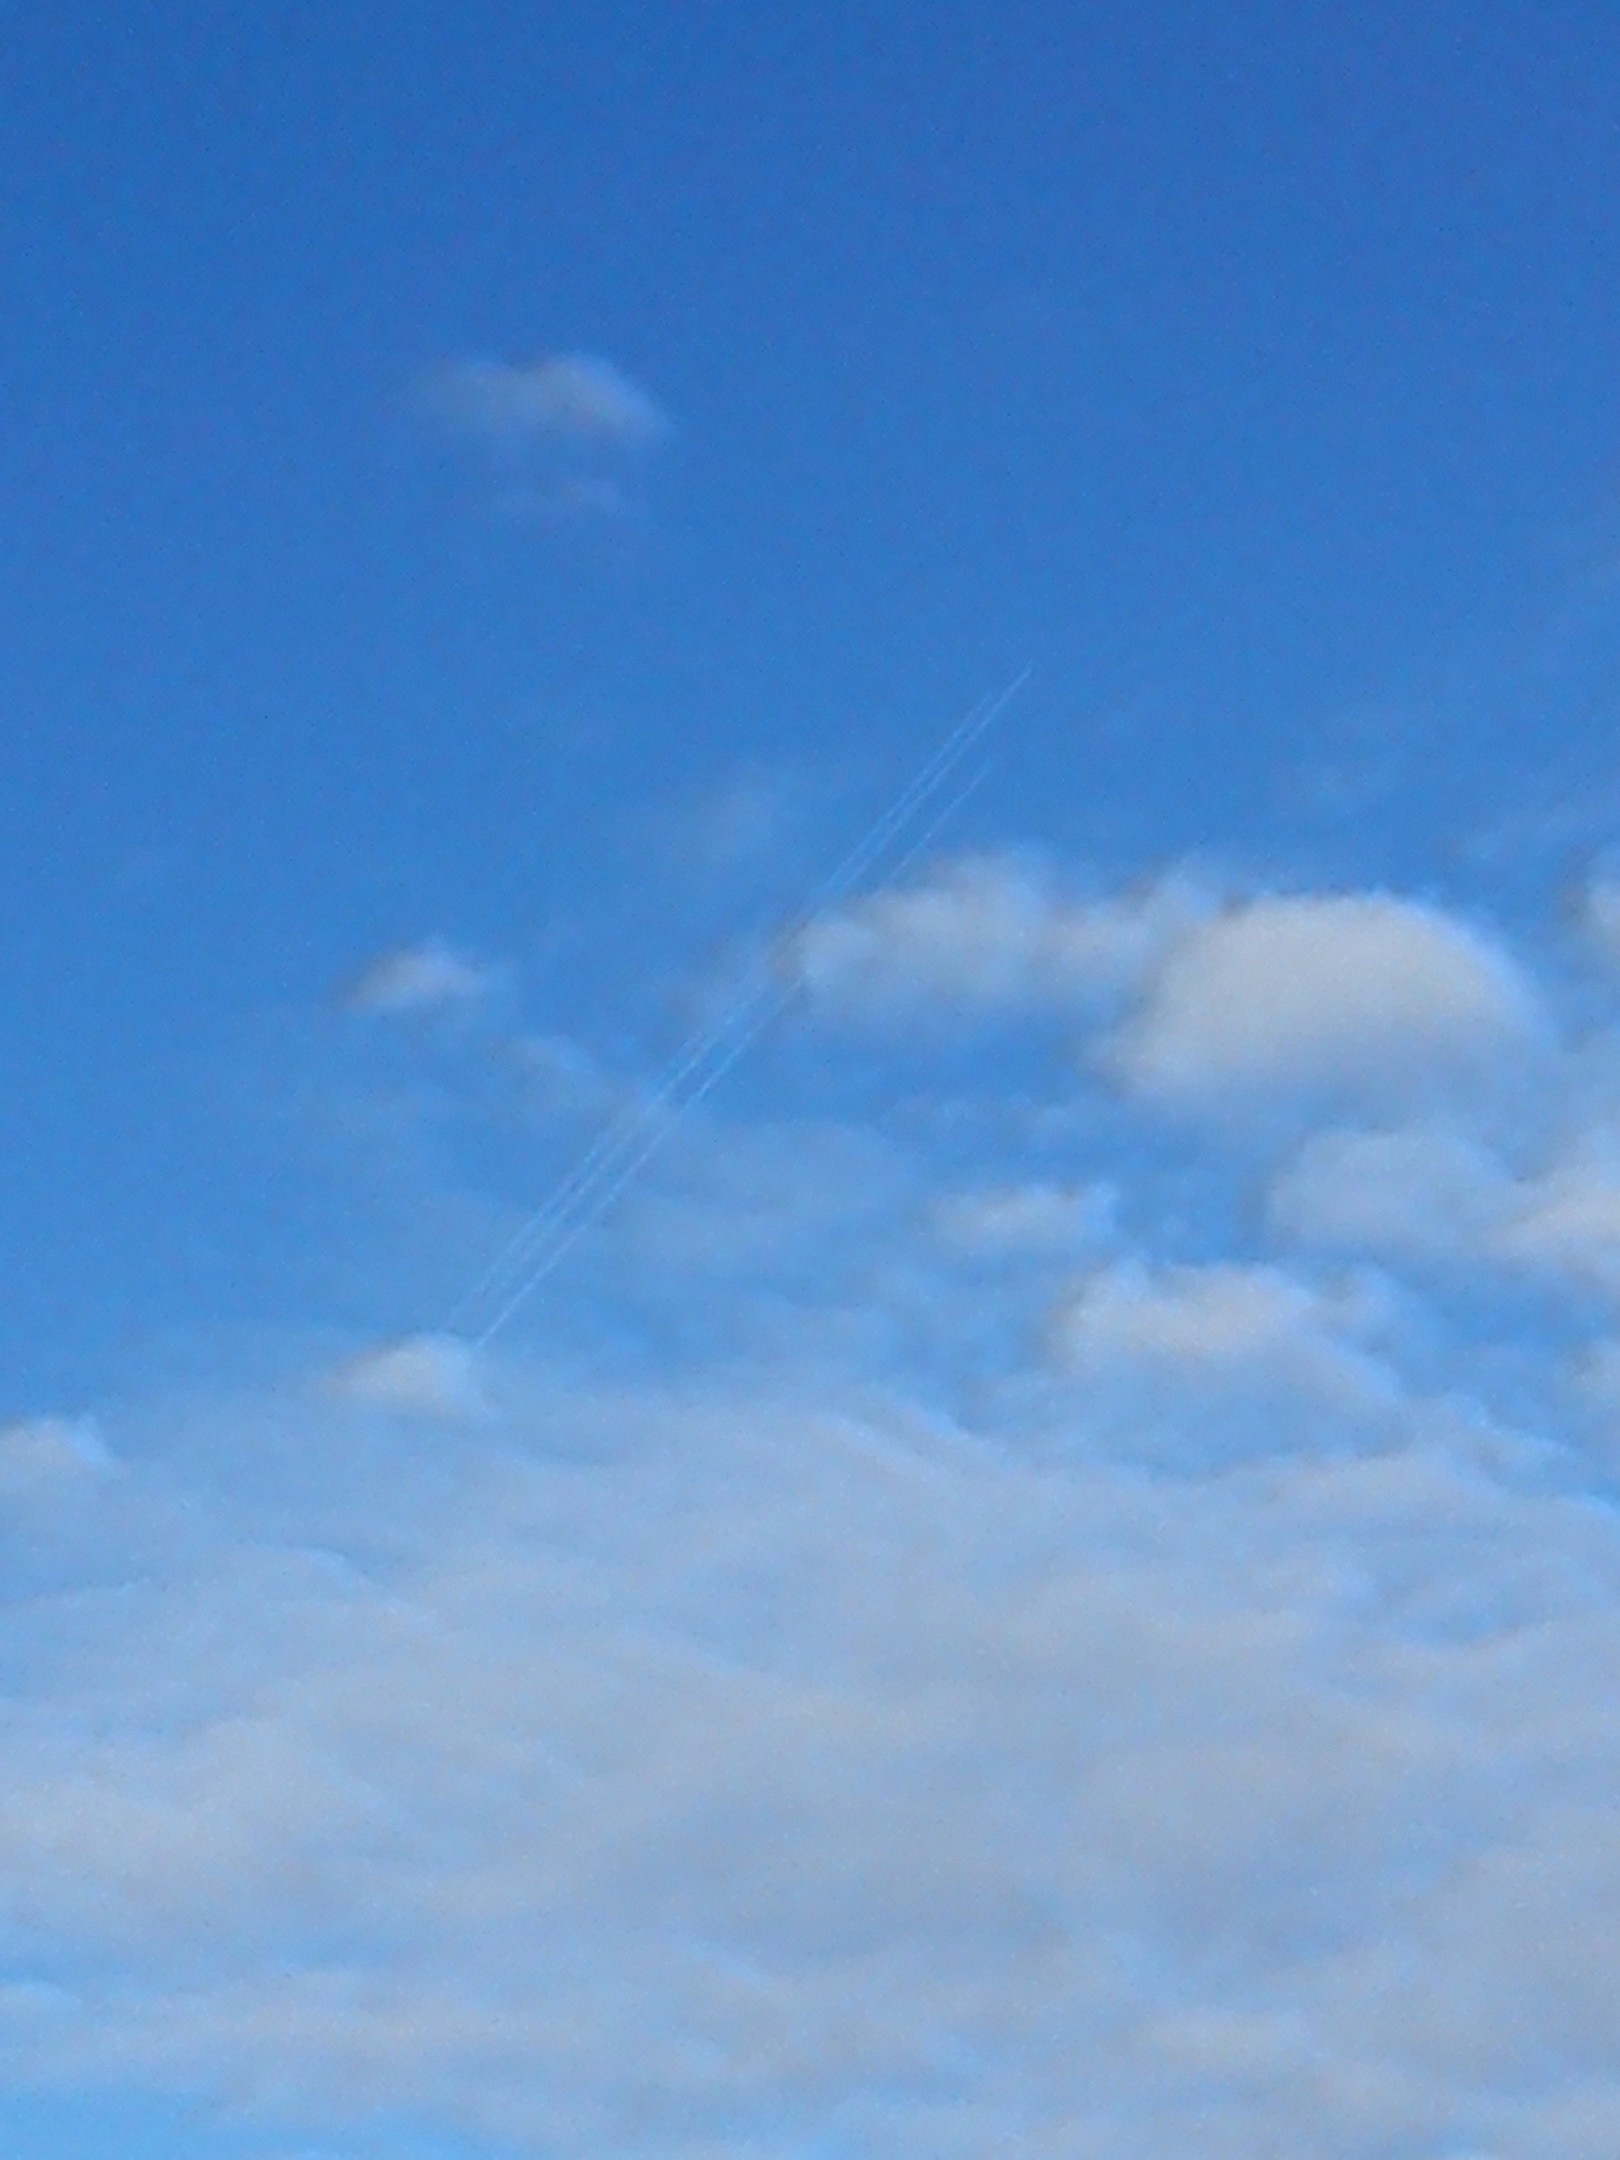 Vapour trails, or contrails, in the sky